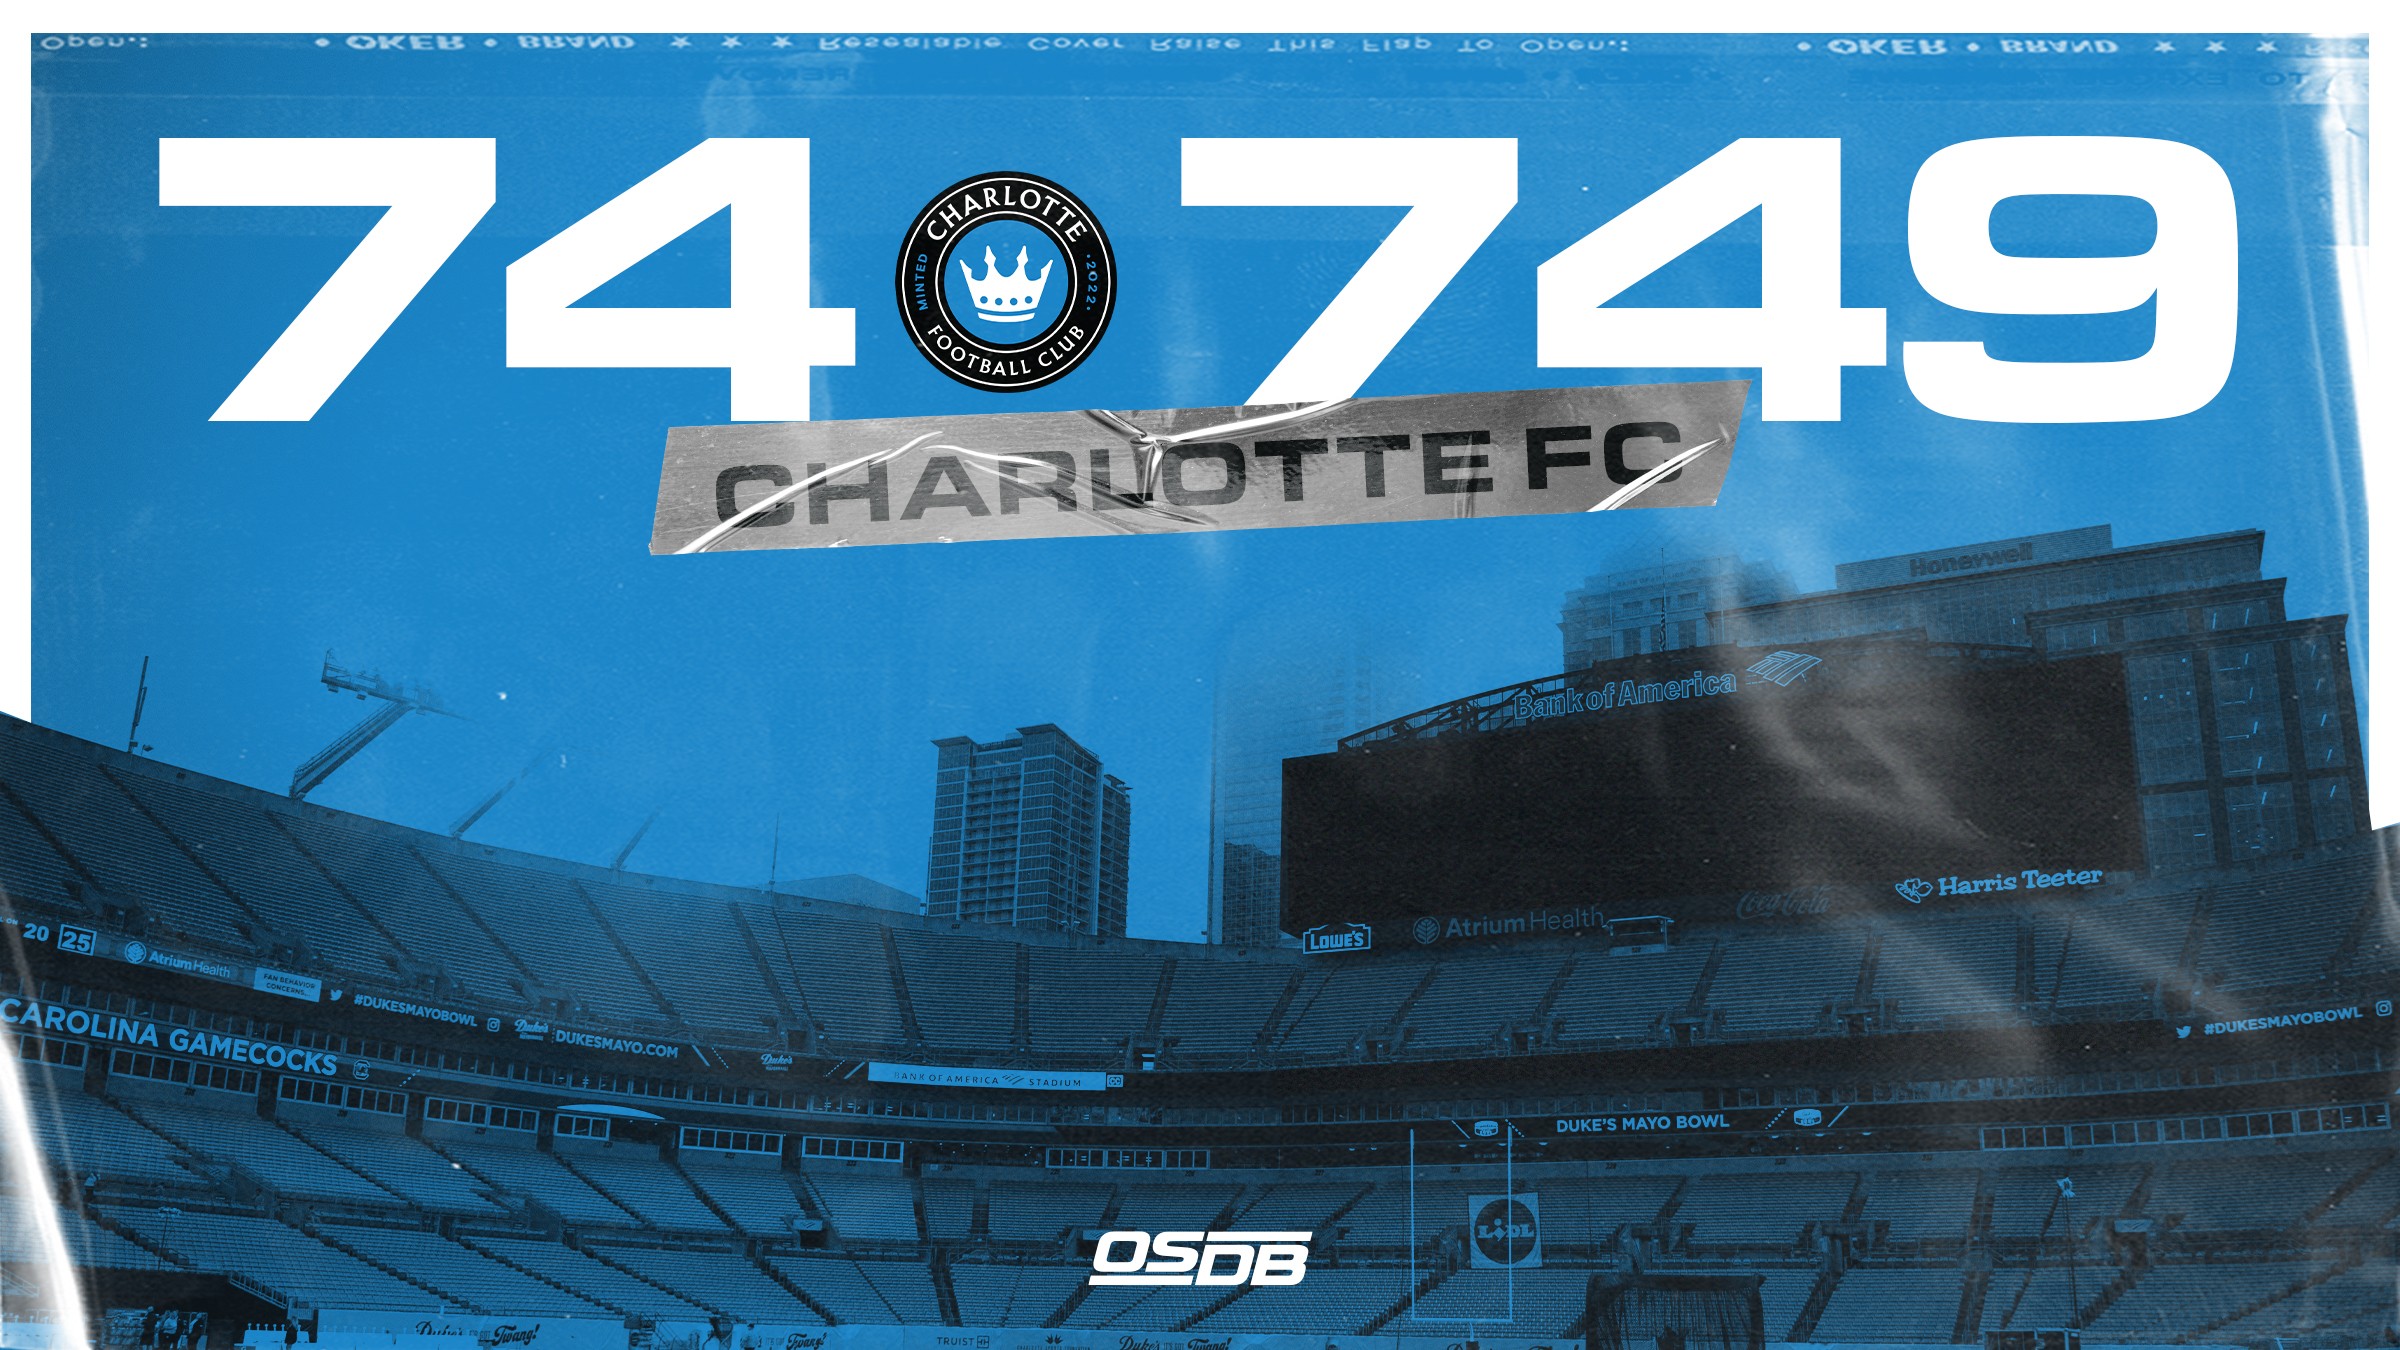 Charlotte becomes MLS hot spot with stunning debut crowd